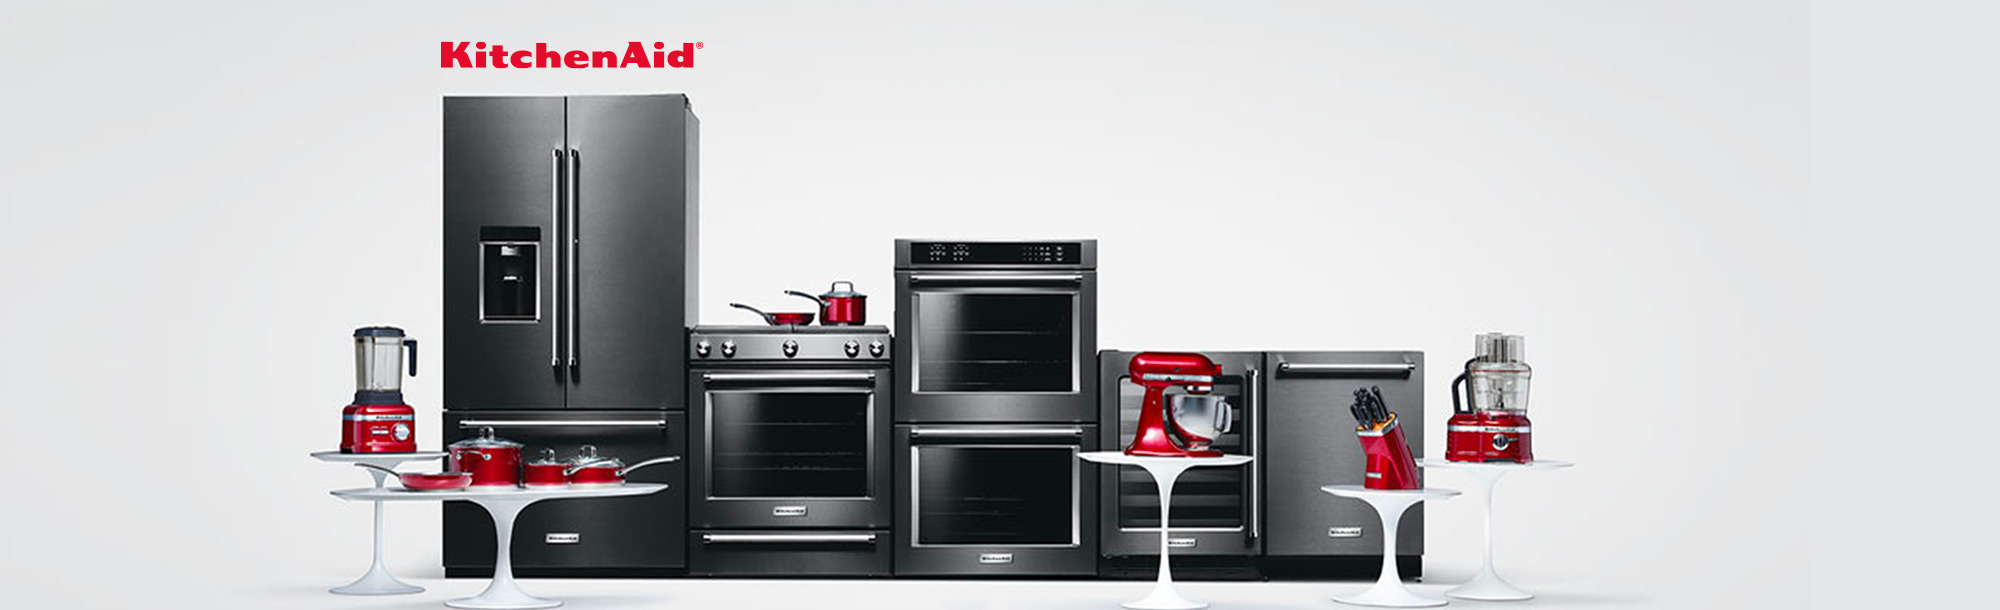 Major and small kitchen appliances, pots and pans, cutlery, KitchenAid